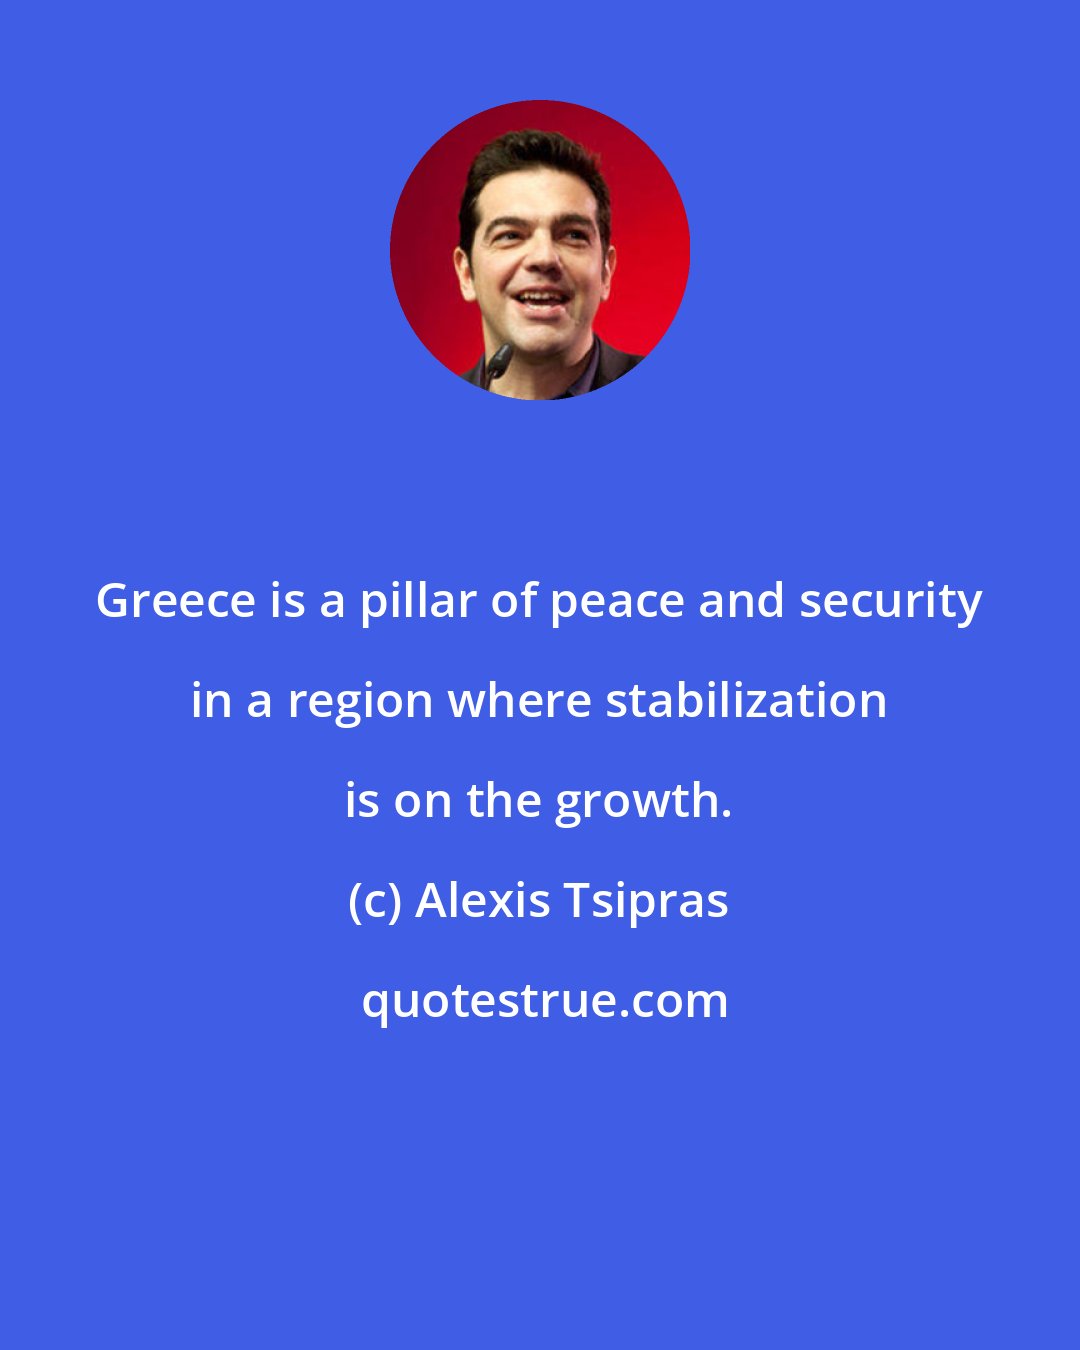 Alexis Tsipras: Greece is a pillar of peace and security in a region where stabilization is on the growth.